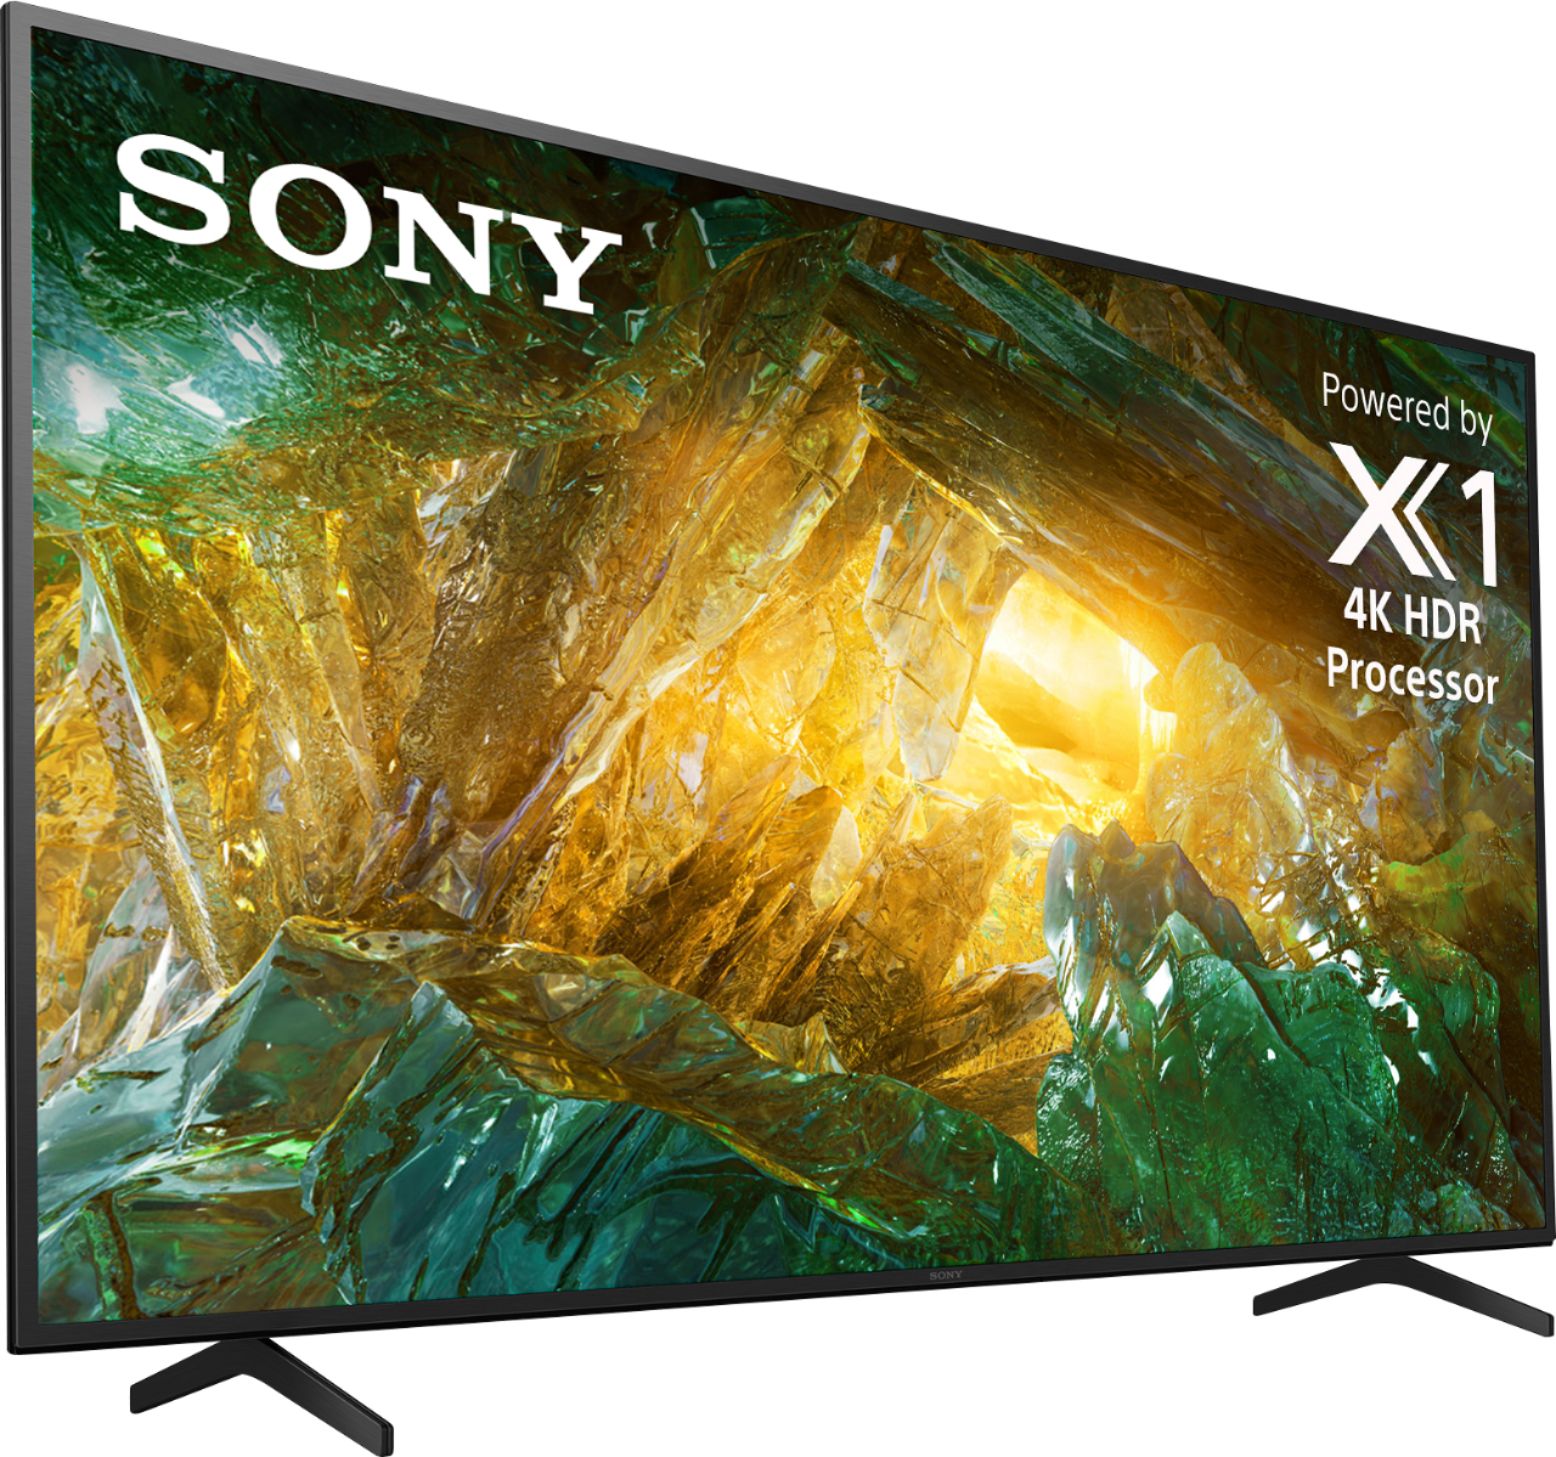 Best Buy: Sony 65" Class Series LED 4K UHD TV Smart Android TV XBR-65X800G